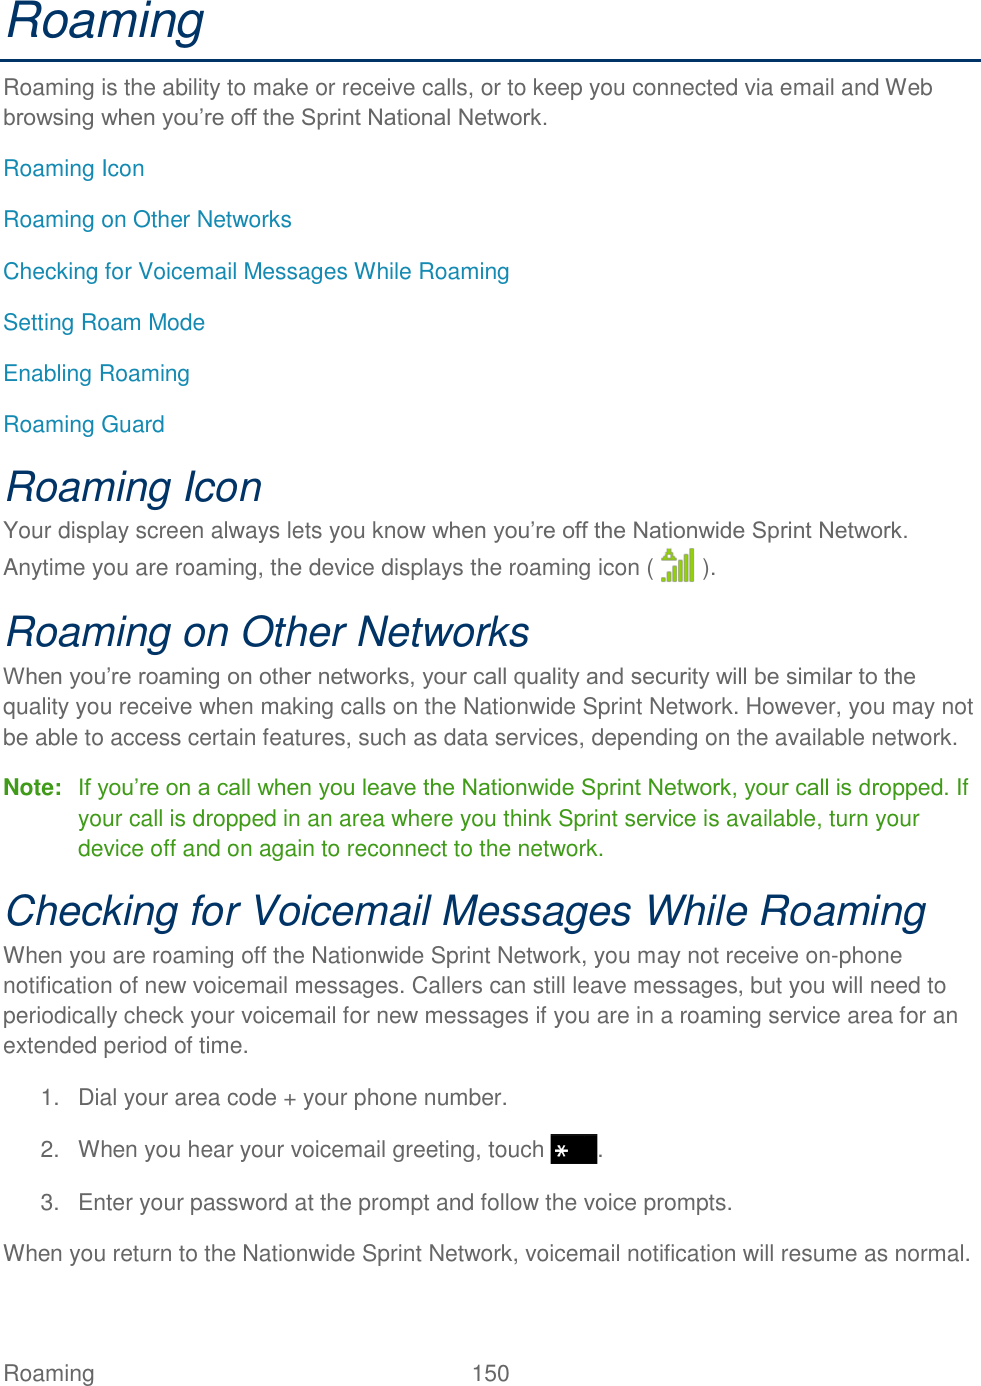 Roaming  150   Roaming Roaming is the ability to make or receive calls, or to keep you connected via email and Web browsing when you’re off the Sprint National Network. Roaming Icon Roaming on Other Networks Checking for Voicemail Messages While Roaming Setting Roam Mode Enabling Roaming Roaming Guard Roaming Icon Your display screen always lets you know when you’re off the Nationwide Sprint Network. Anytime you are roaming, the device displays the roaming icon (   ). Roaming on Other Networks When you’re roaming on other networks, your call quality and security will be similar to the quality you receive when making calls on the Nationwide Sprint Network. However, you may not be able to access certain features, such as data services, depending on the available network. Note: If you’re on a call when you leave the Nationwide Sprint Network, your call is dropped. If your call is dropped in an area where you think Sprint service is available, turn your device off and on again to reconnect to the network. Checking for Voicemail Messages While Roaming When you are roaming off the Nationwide Sprint Network, you may not receive on-phone notification of new voicemail messages. Callers can still leave messages, but you will need to periodically check your voicemail for new messages if you are in a roaming service area for an extended period of time. 1.  Dial your area code + your phone number. 2.  When you hear your voicemail greeting, touch  . 3.  Enter your password at the prompt and follow the voice prompts. When you return to the Nationwide Sprint Network, voicemail notification will resume as normal. 